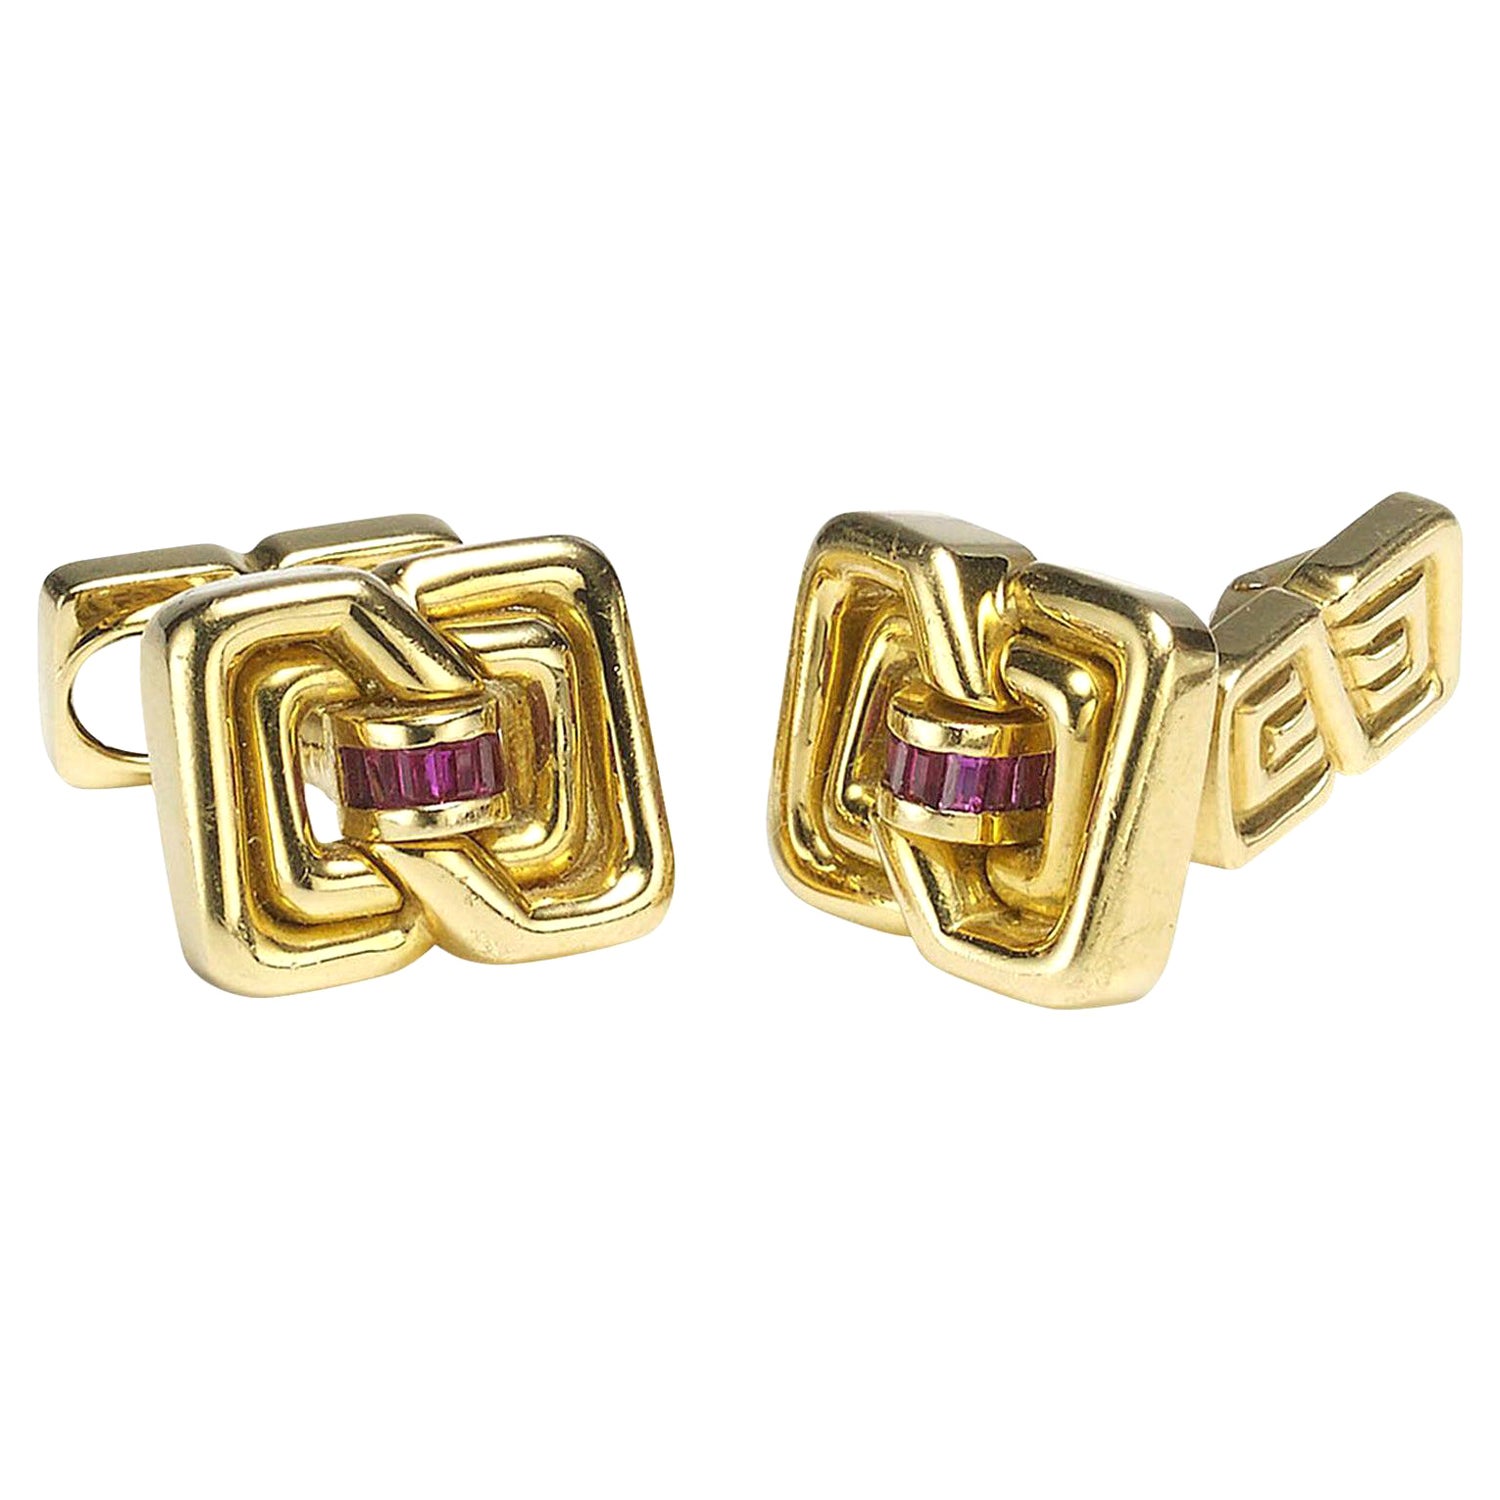 Vintage Tiffany & Co. Gold and Ruby Cufflinks, Circa 1970 For Sale